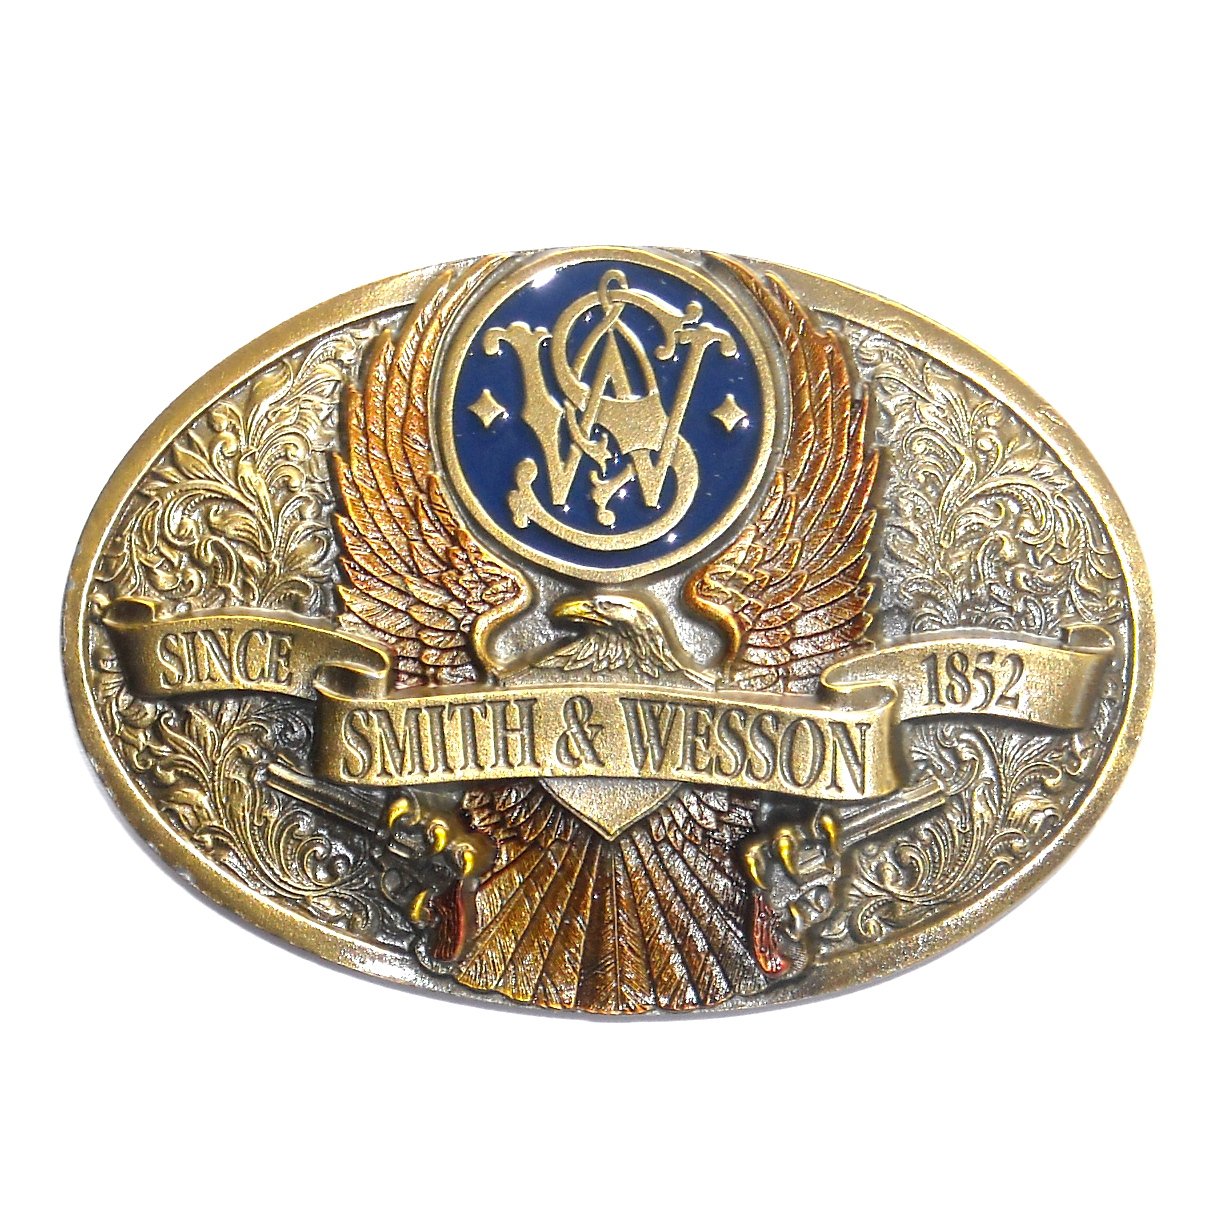 Smith and Wesson Brass Eagle Belt Buckle #677 American Traditions